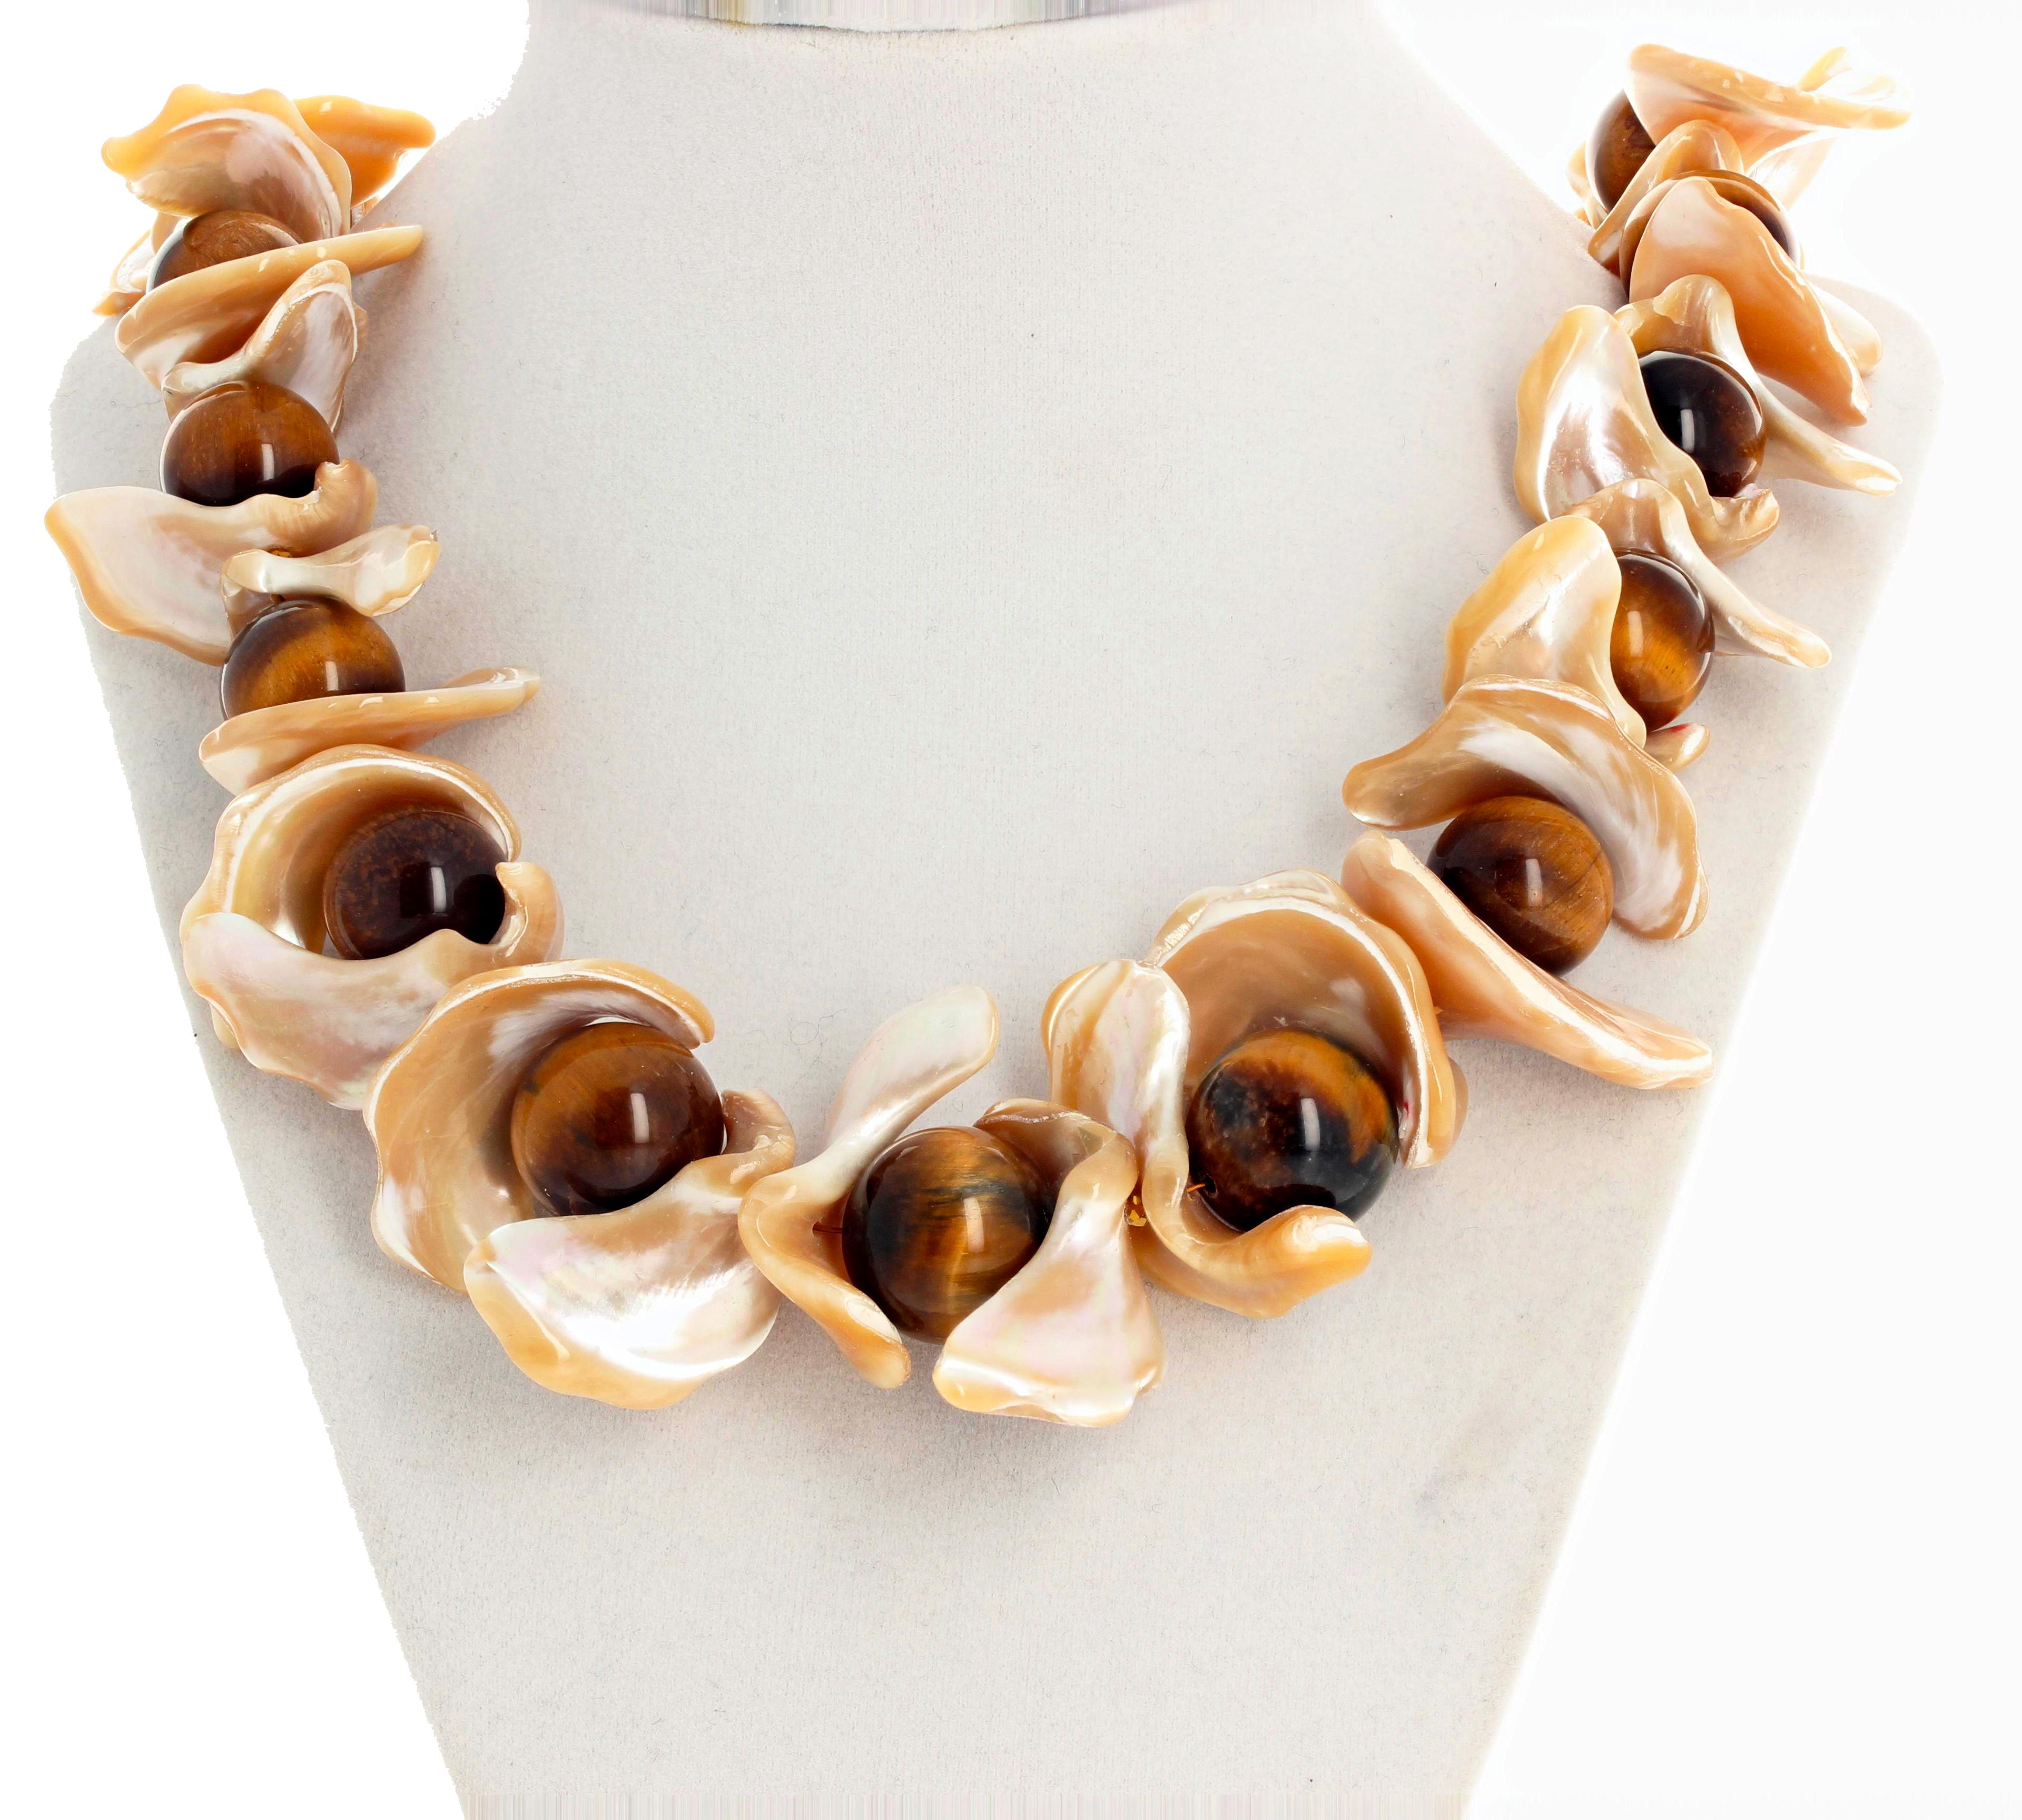 Mixed Cut AJD Dramatic Artistic Natural Glowing Pearl Shells & Tiger Eye Bead Necklace For Sale